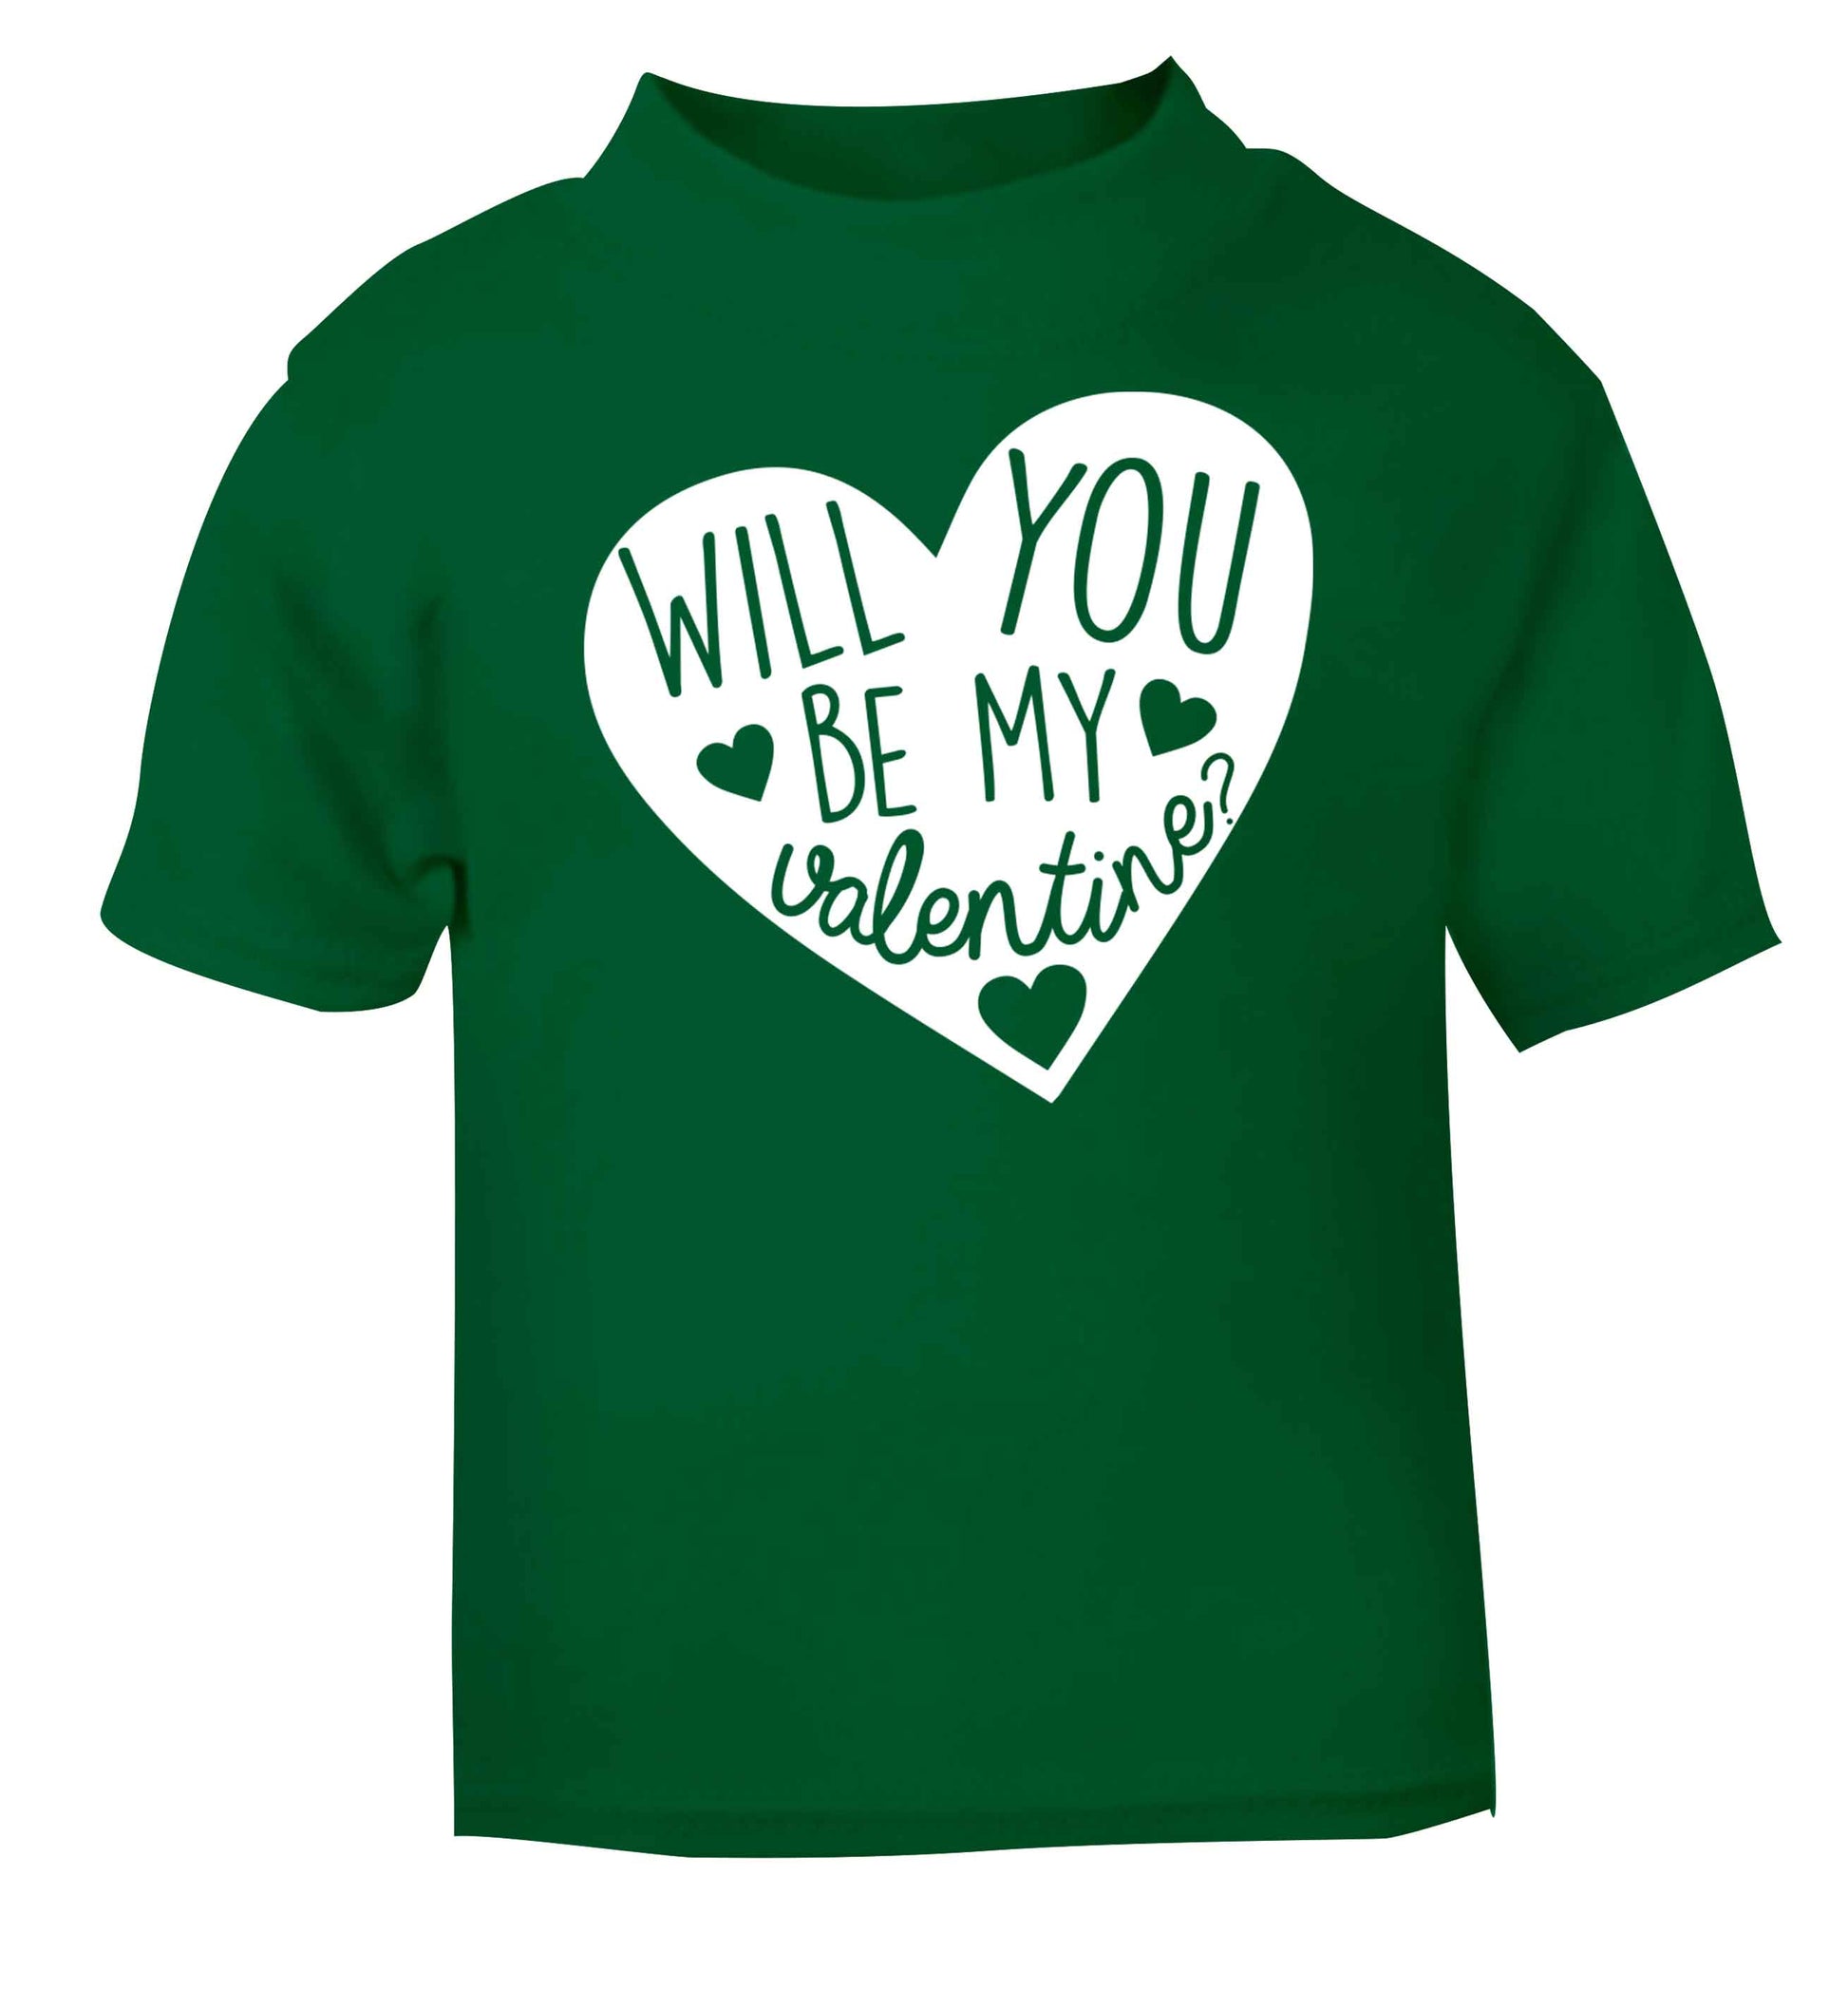 Will you be my valentine? green baby toddler Tshirt 2 Years